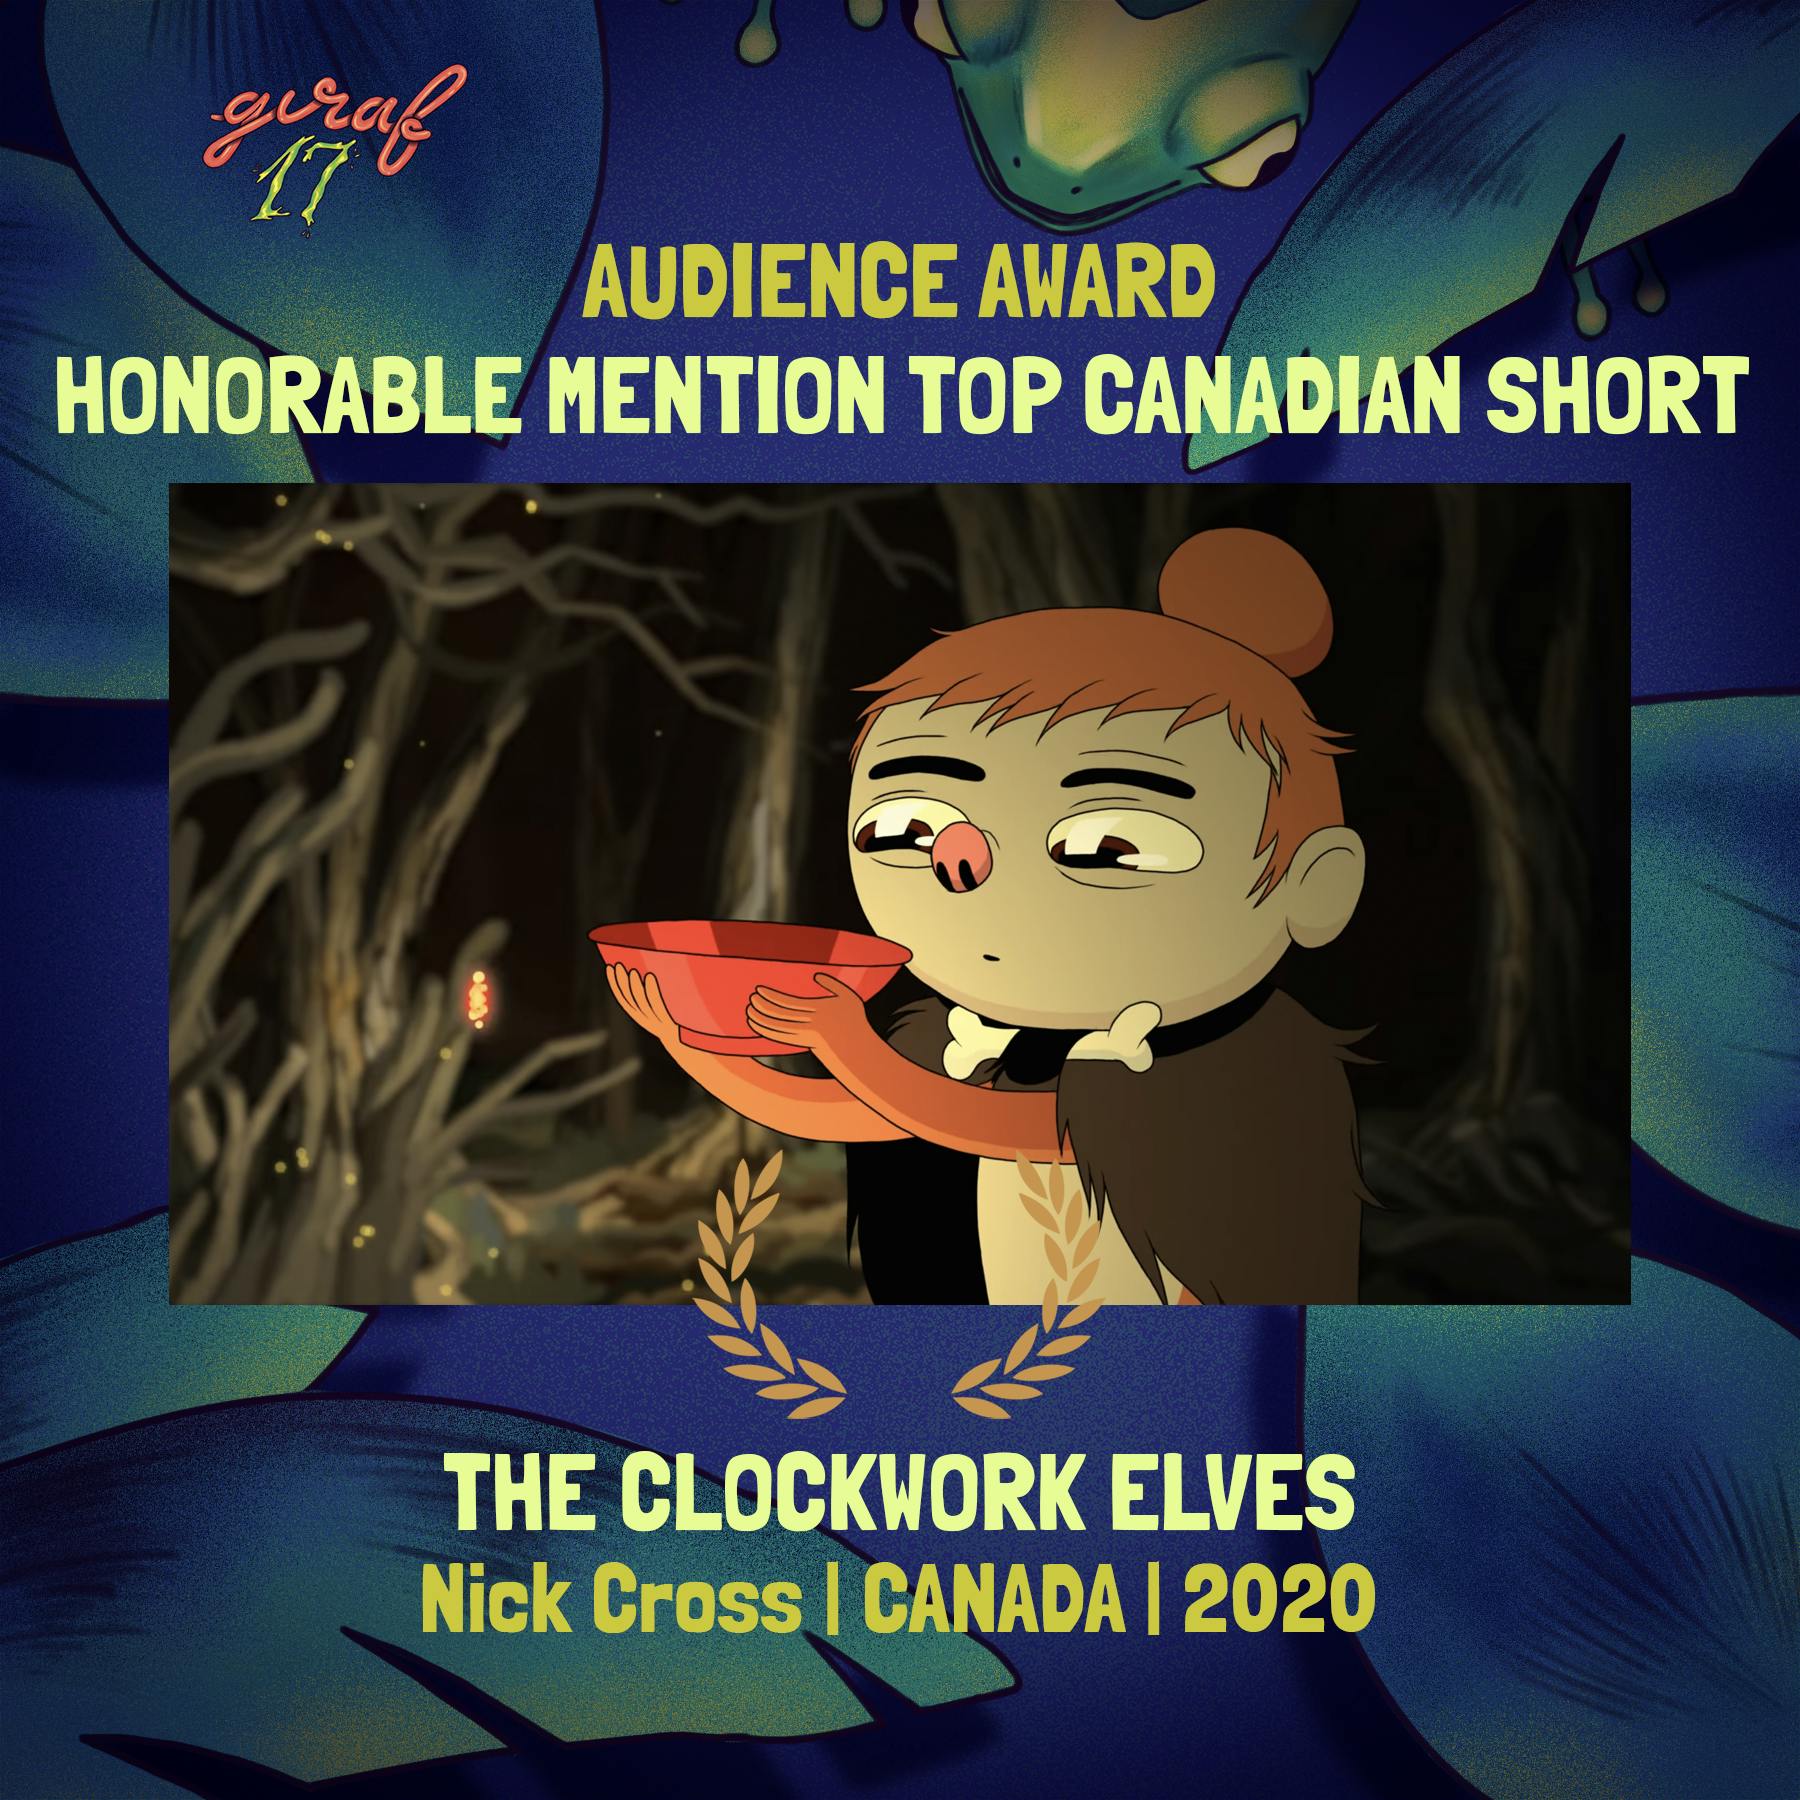 A gnome-like being stares suspiciously at the bowl it's holding. Surrounding text: GIRAF17 Audience Award: Honorable Mention Top Canadian Short; The Clockwork Elves; Nick Cross; Canada; 2020